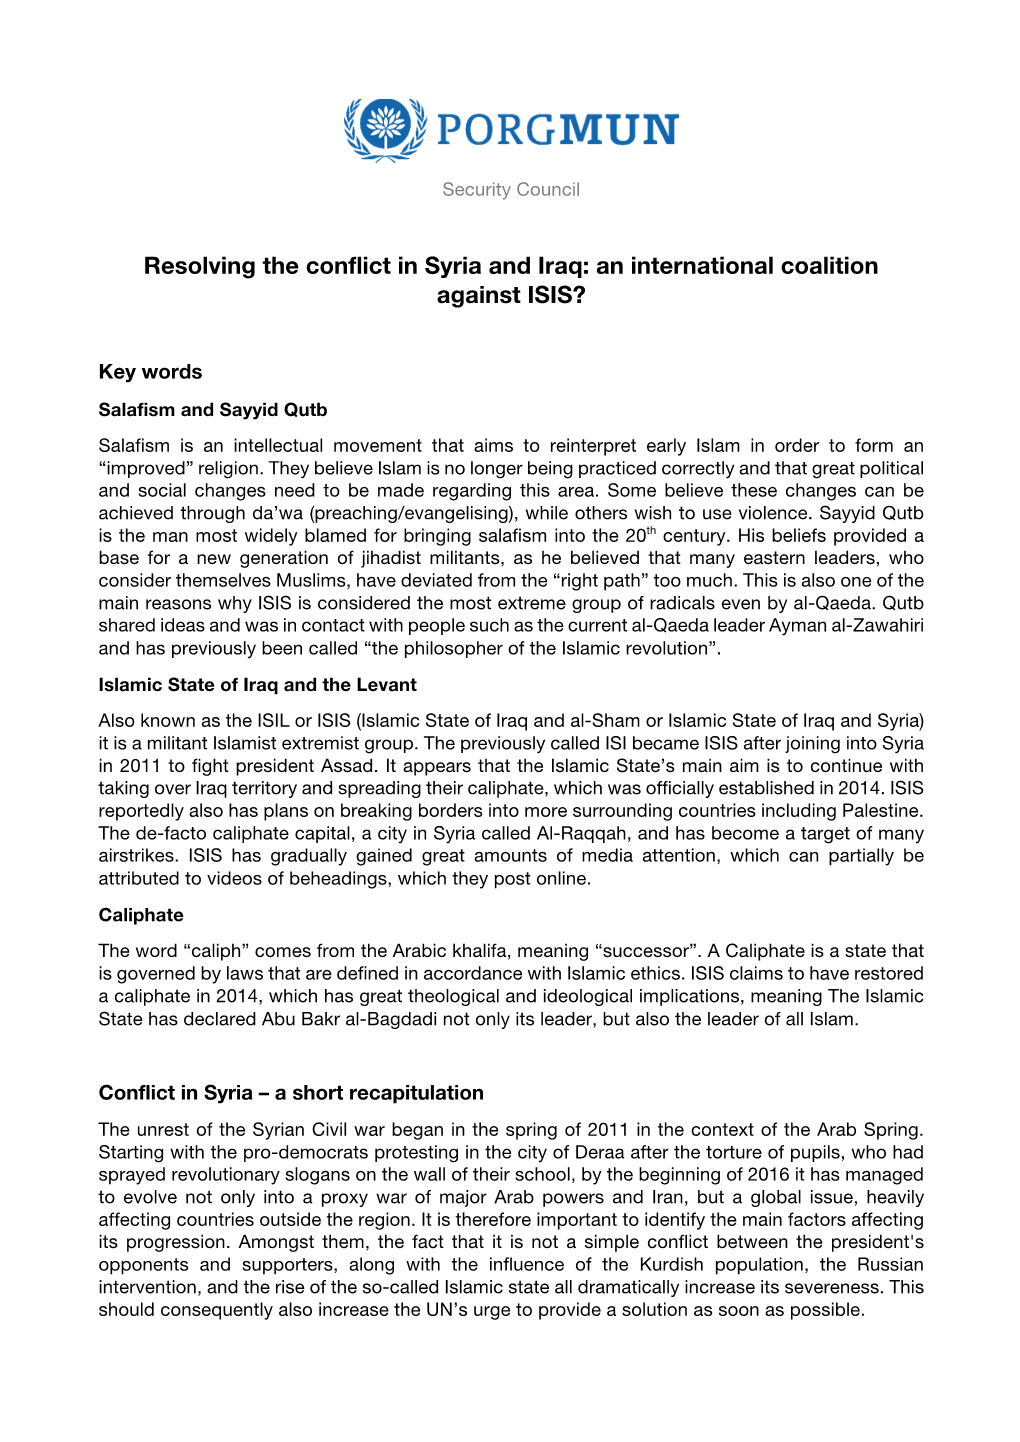 Resolving the Conflict in Syria and Iraq: an International Coalition Against ISIS?